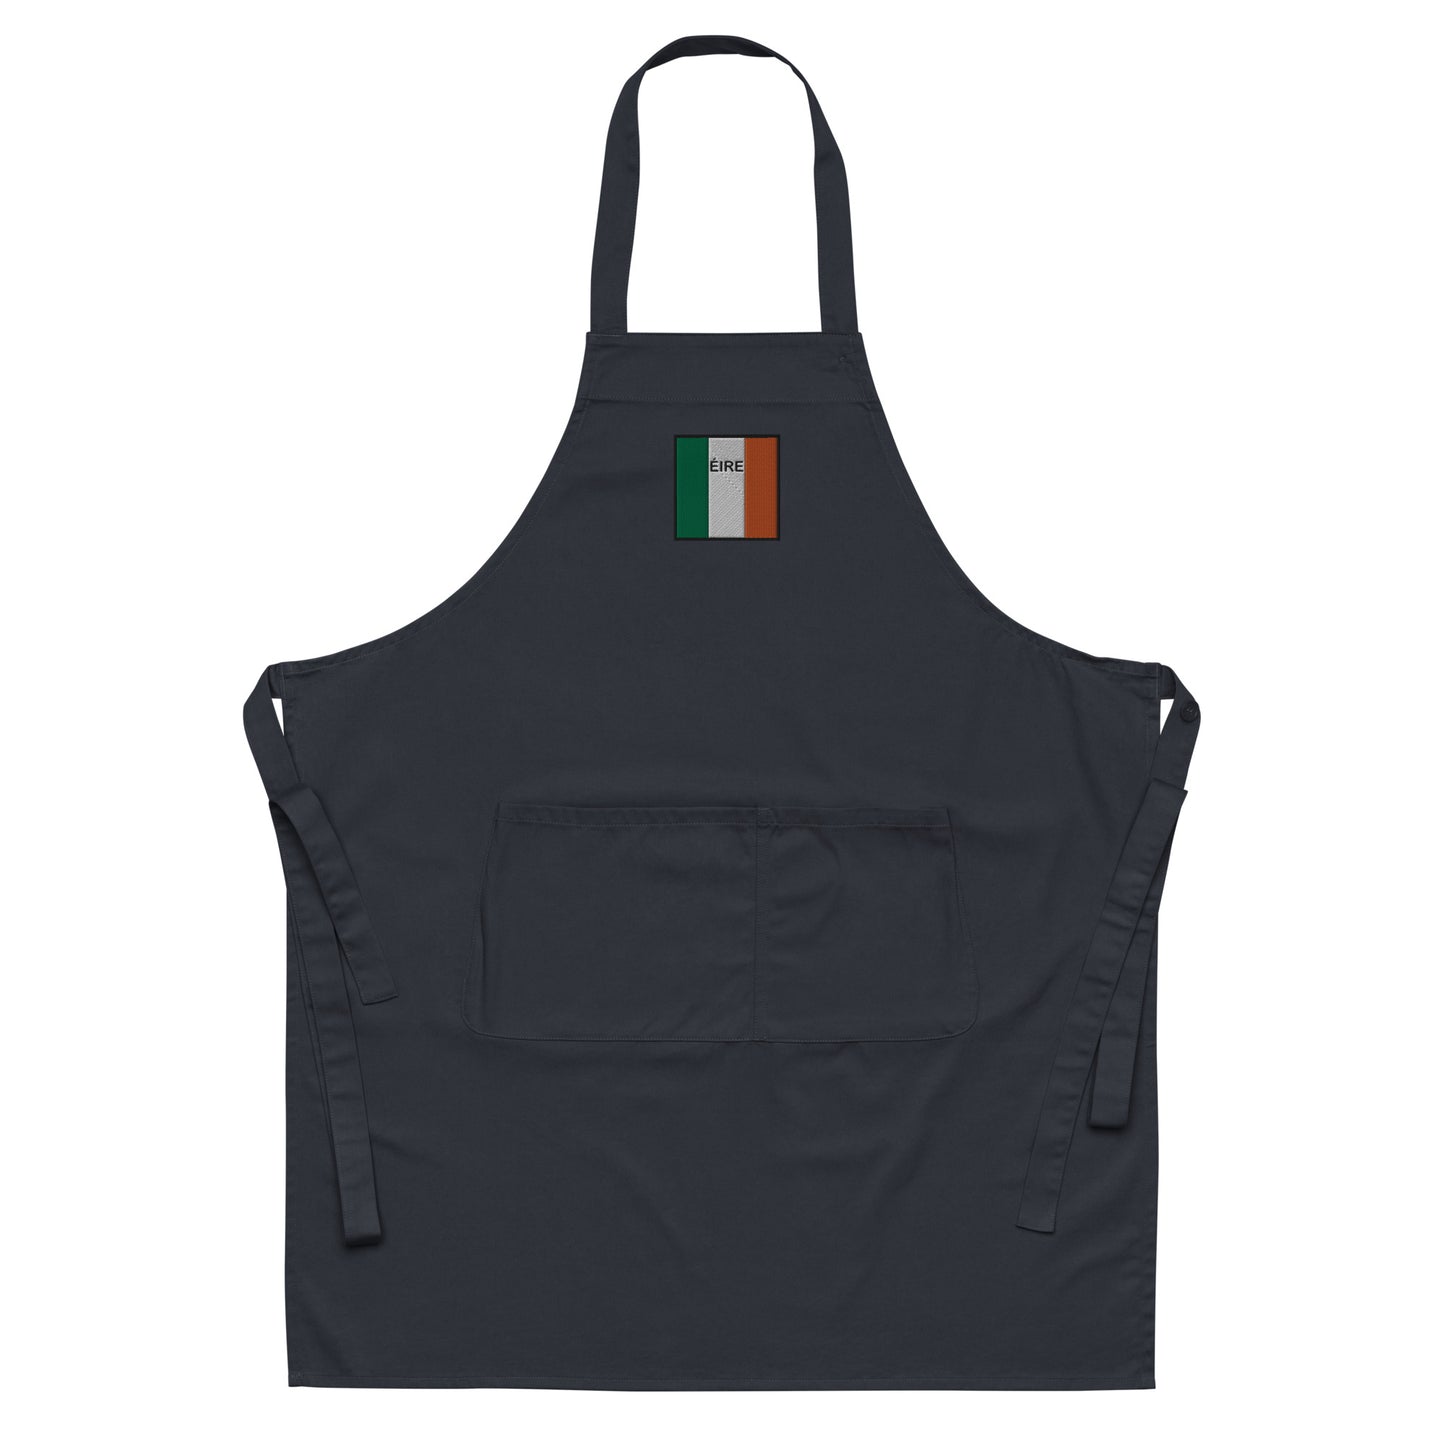 Embroidered ÉIRE Organic Apron